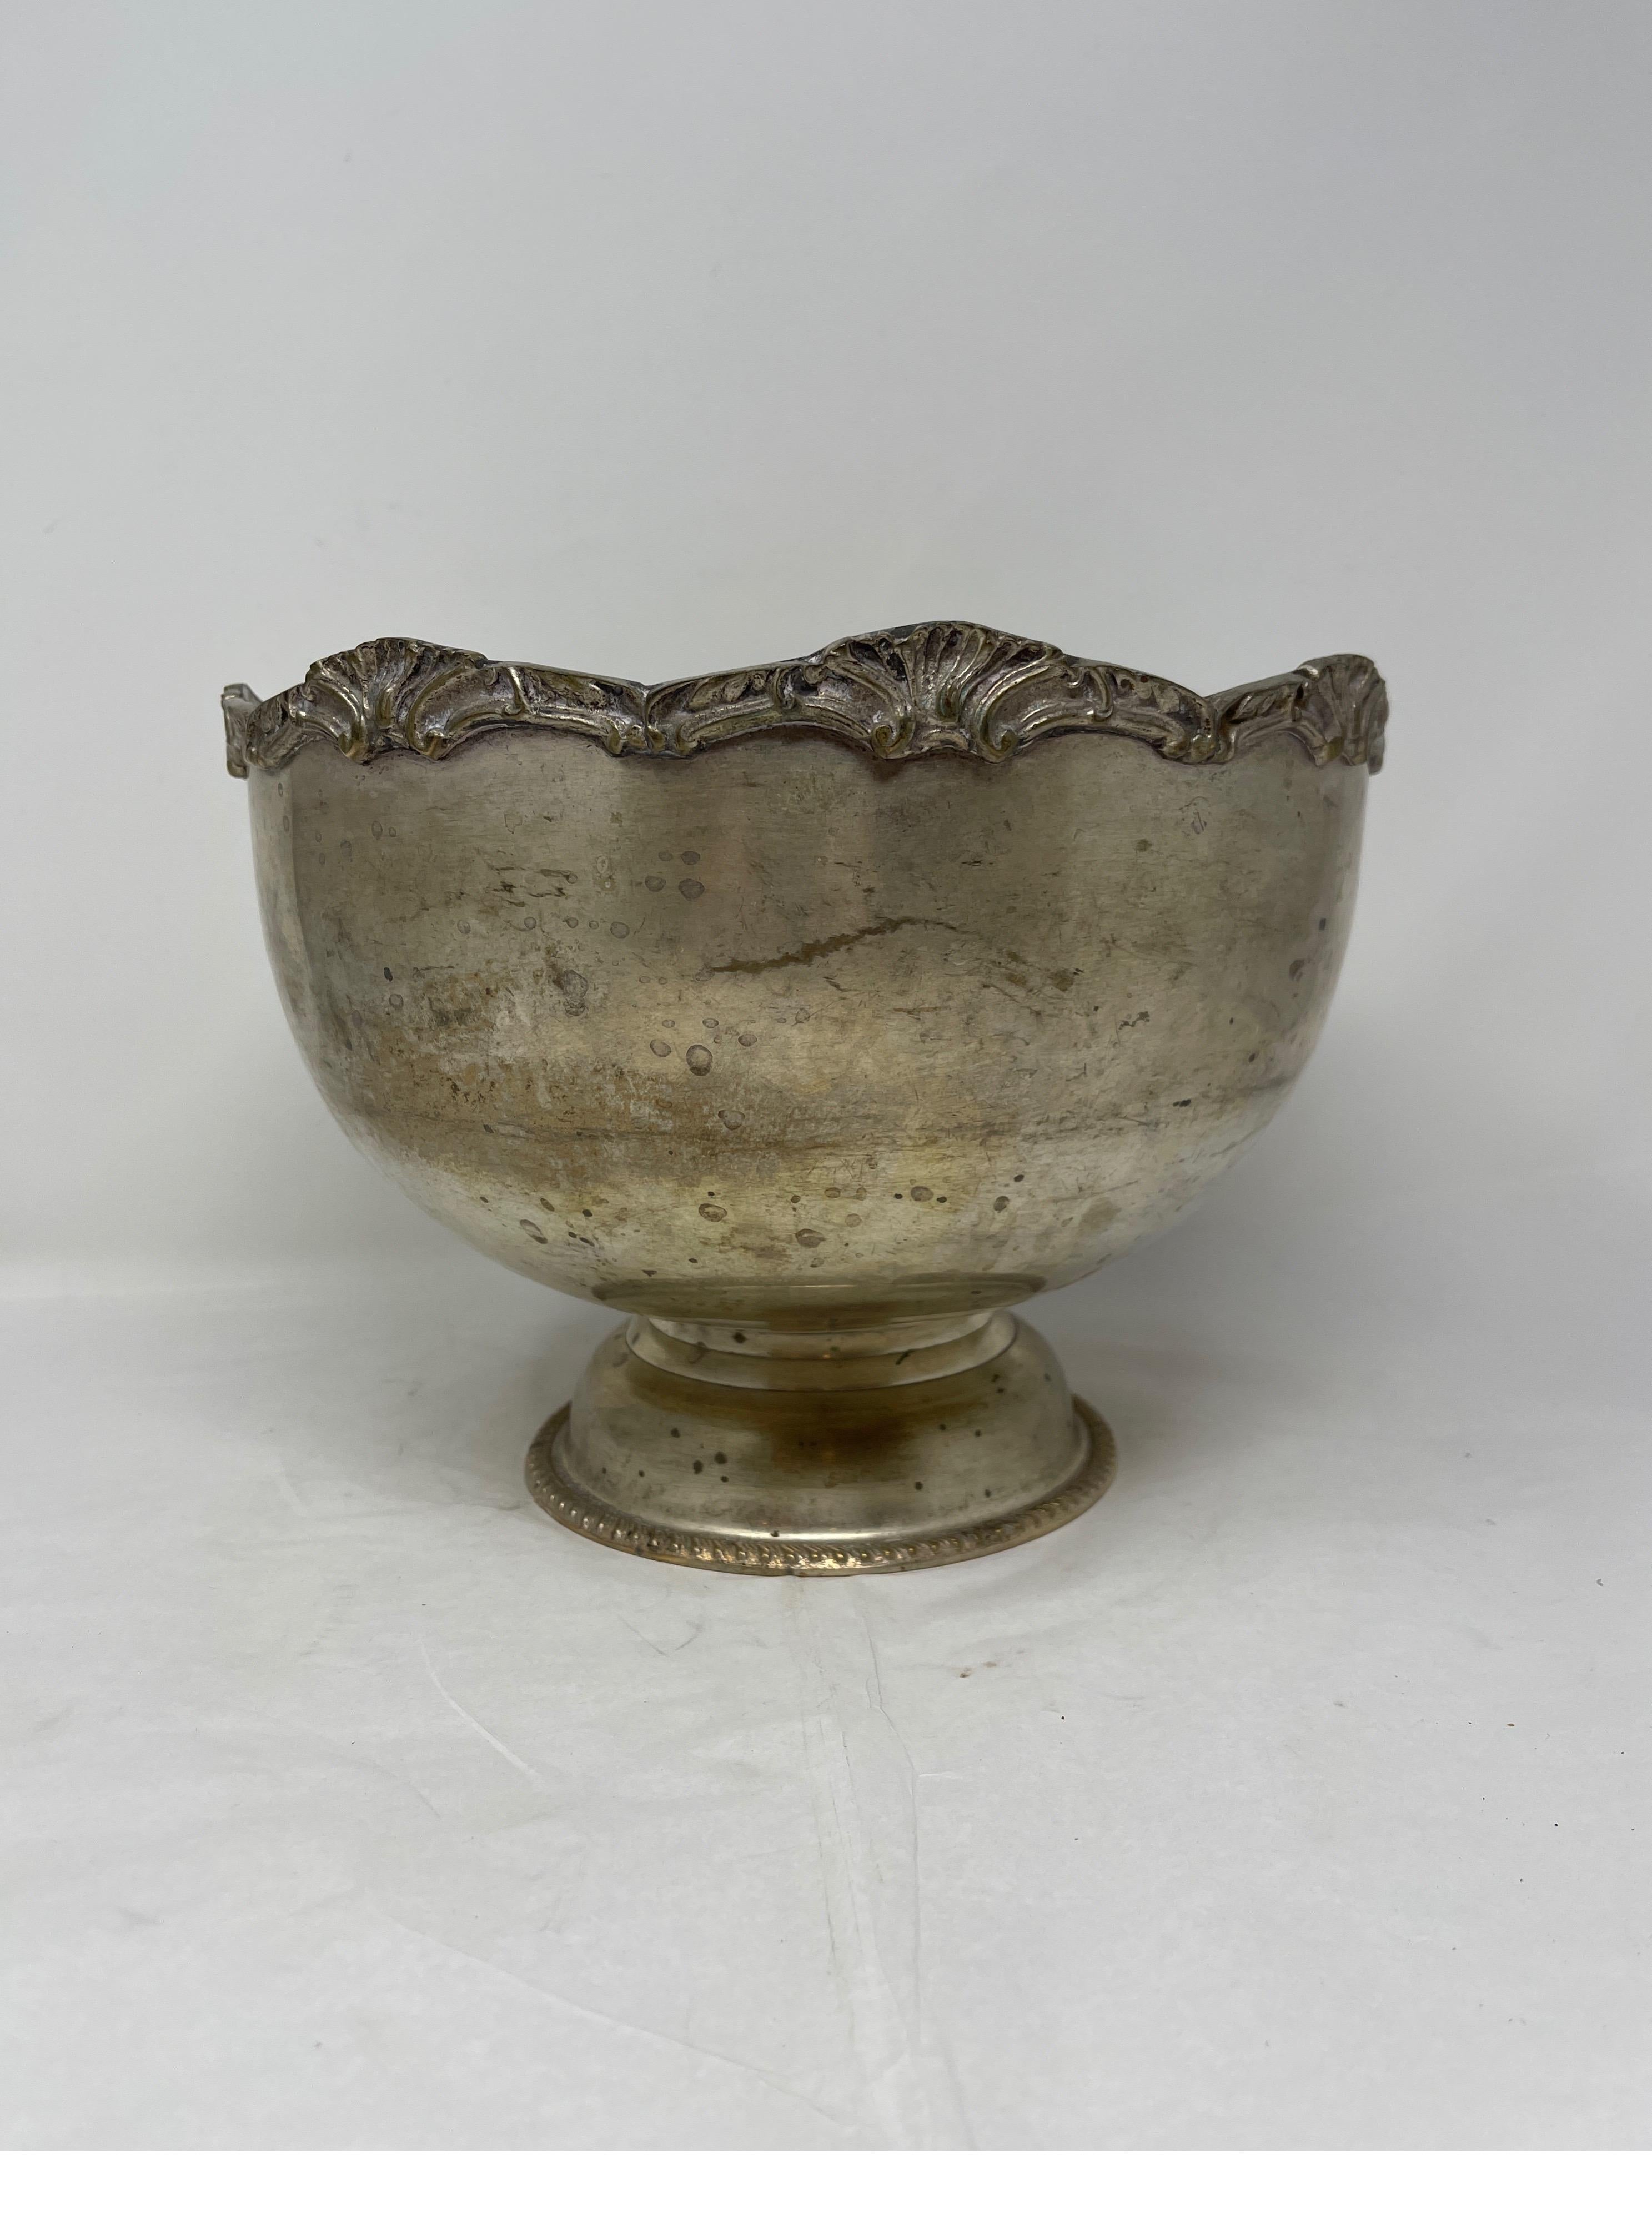 This beautifully made hotel silver champagne bowl with with etched footed bottom. This bowl has intricate scroll work around the rim. A fantastic addition to any home bar or the perfect place for your Veuve Clicquot to rest in a refreshing ice